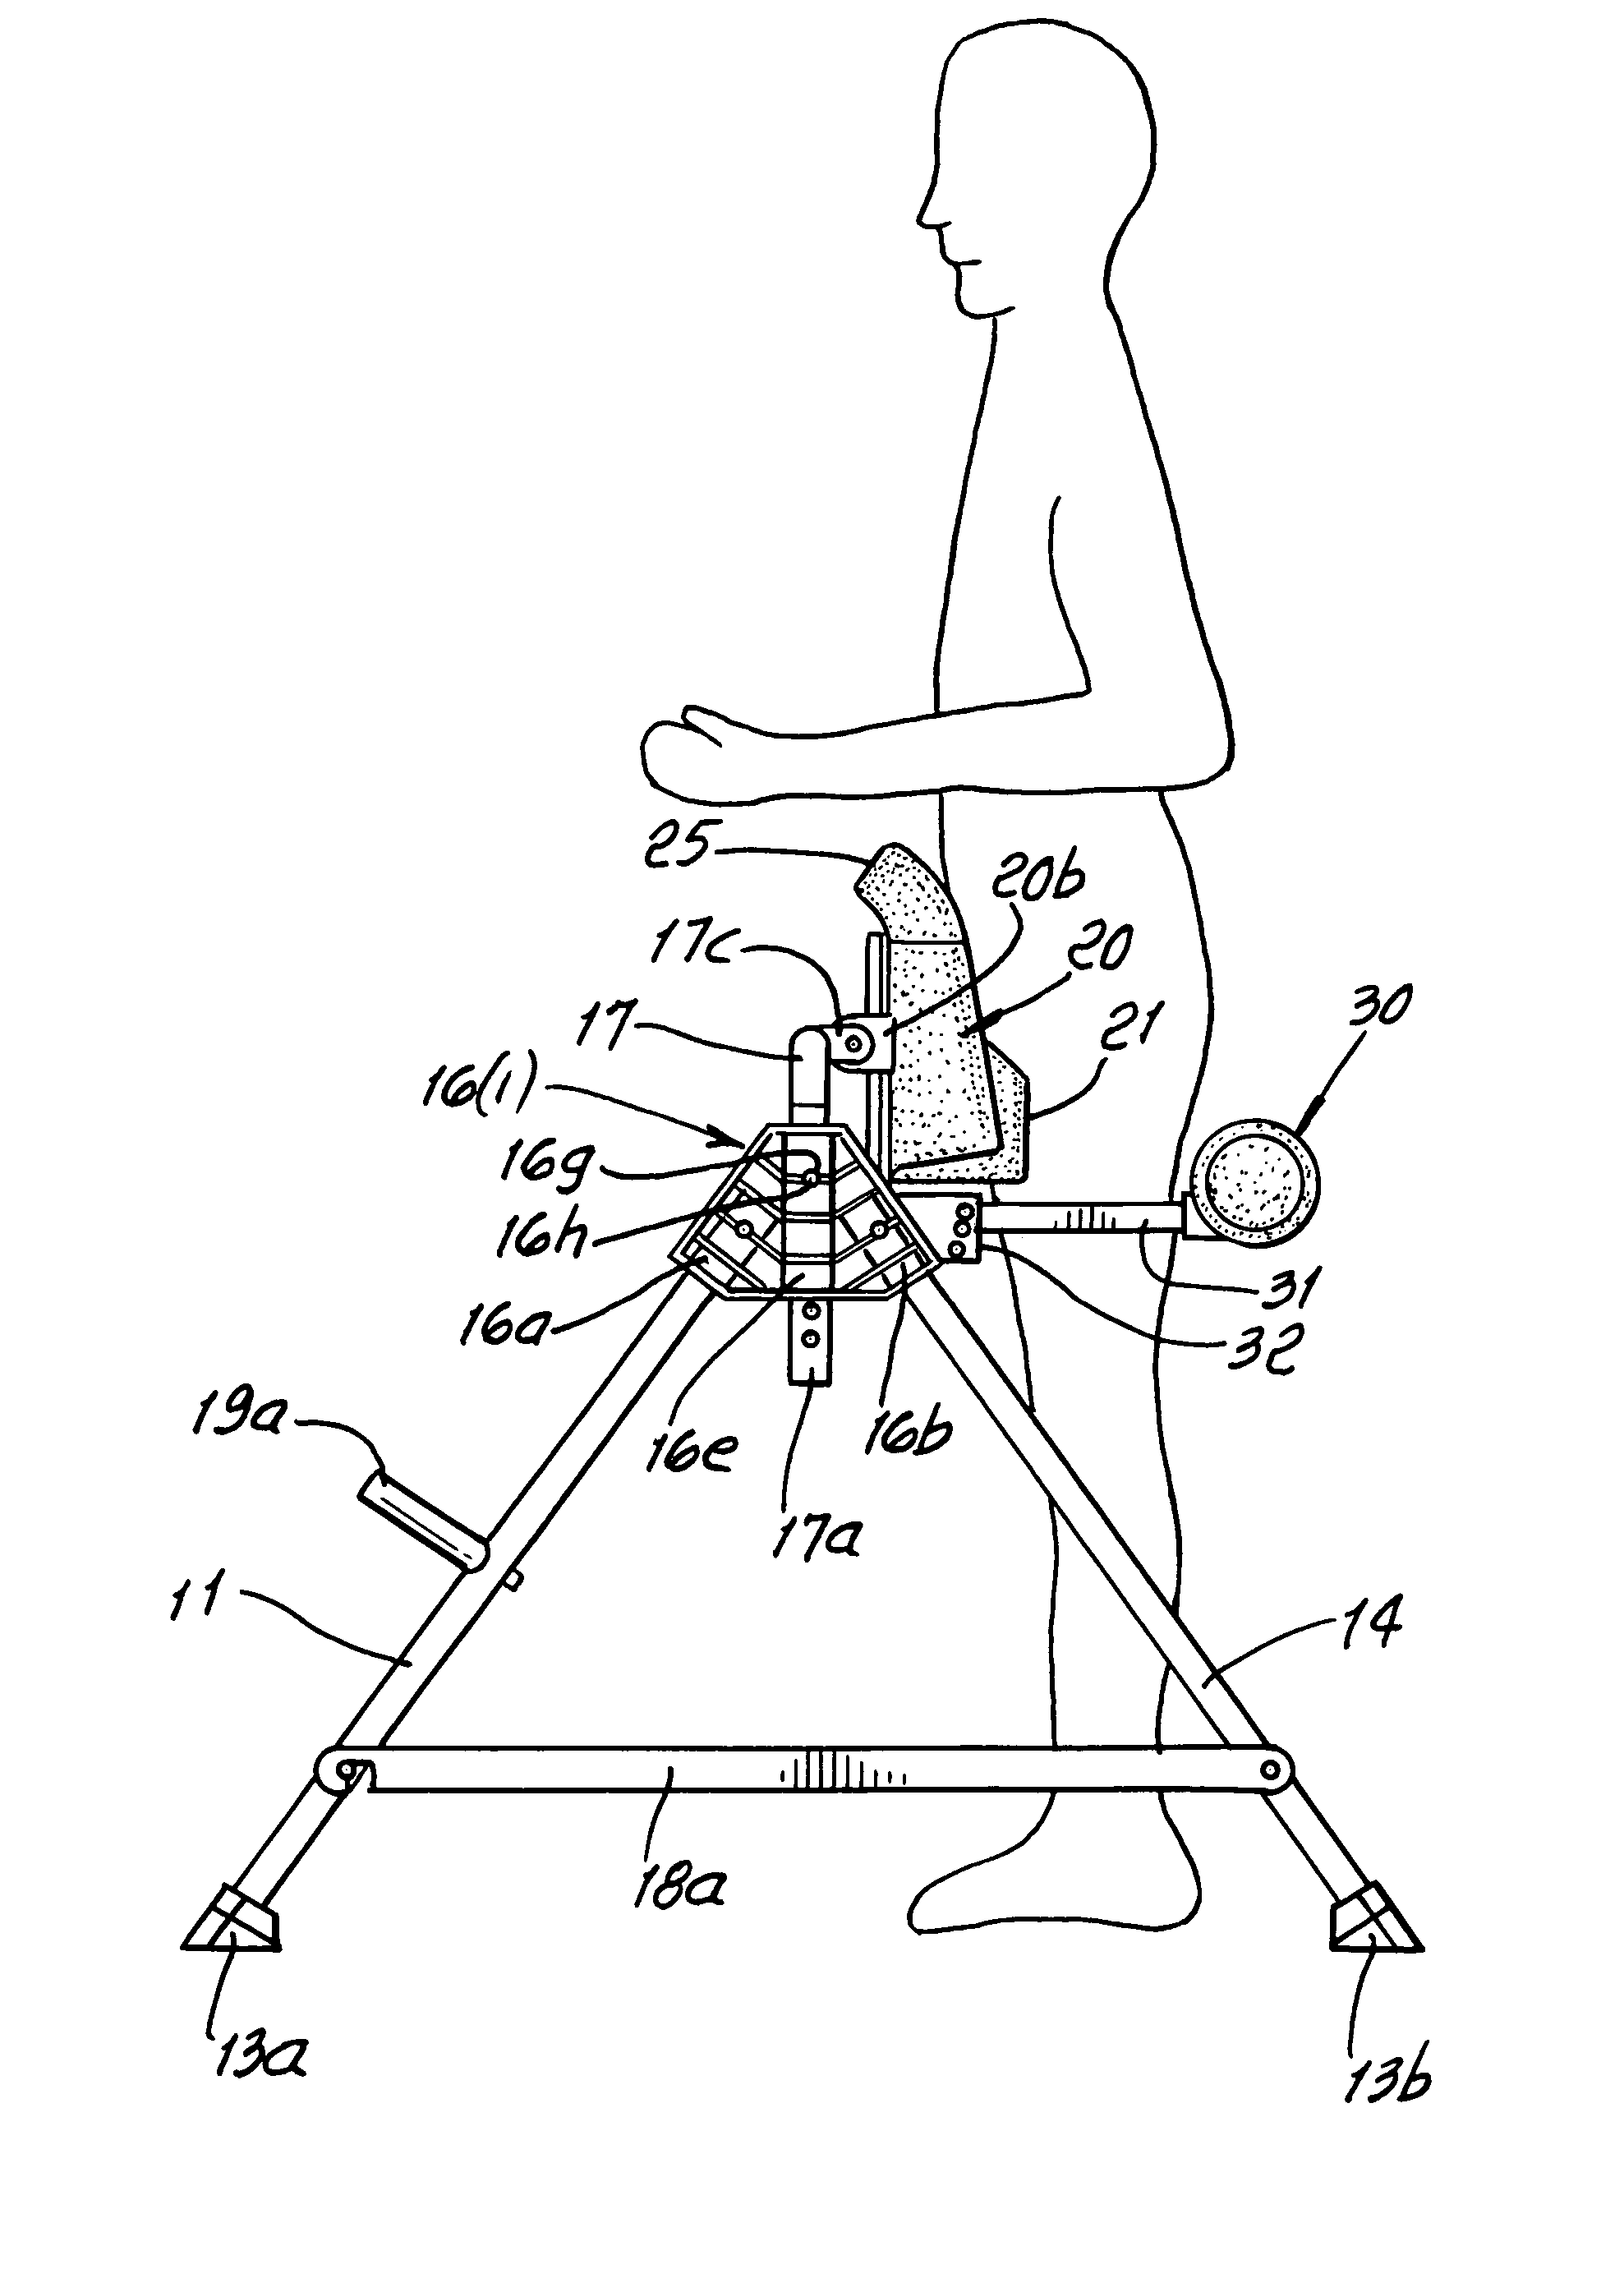 Abductor contraction, variable leg/knee/thigh/trunk and spinal decompression exercise and rehabilitation apparatus and method